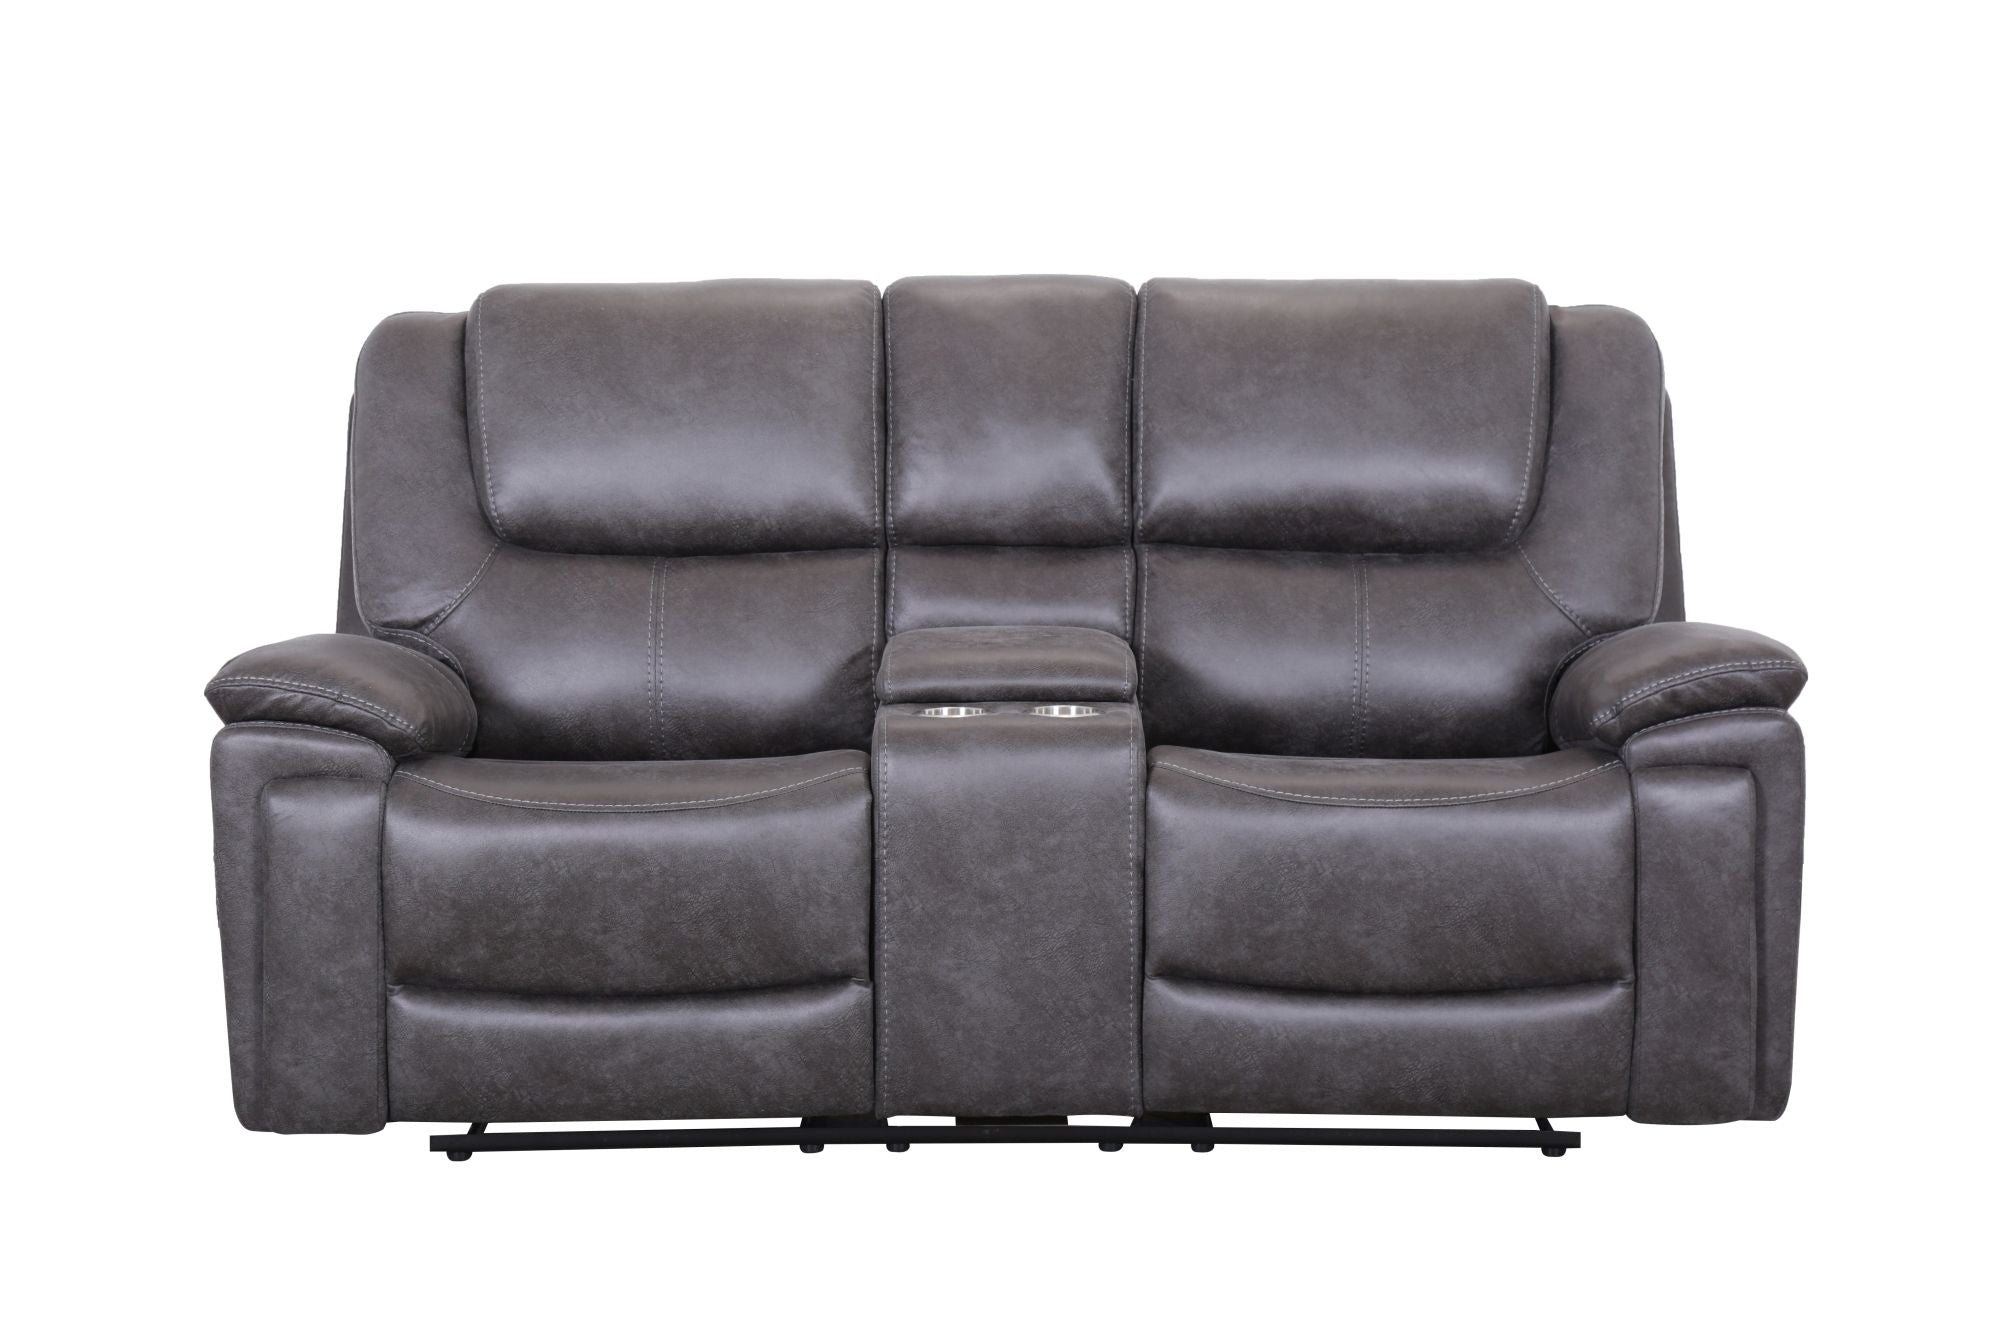 Brentor 2 Seater Electric Recliner Sofa with Console and Power Headrest